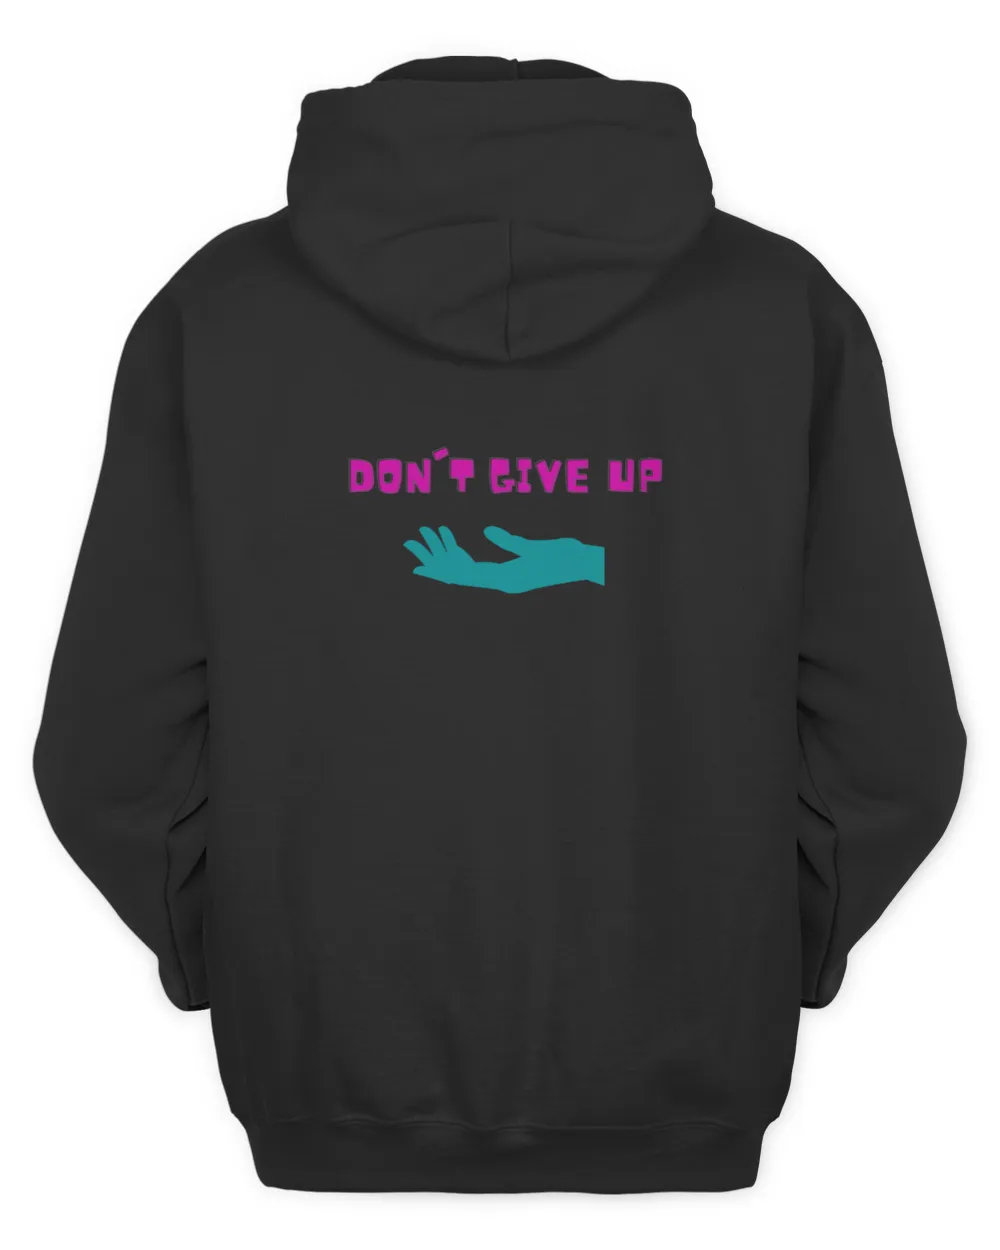 don't give up (friends, family, love)